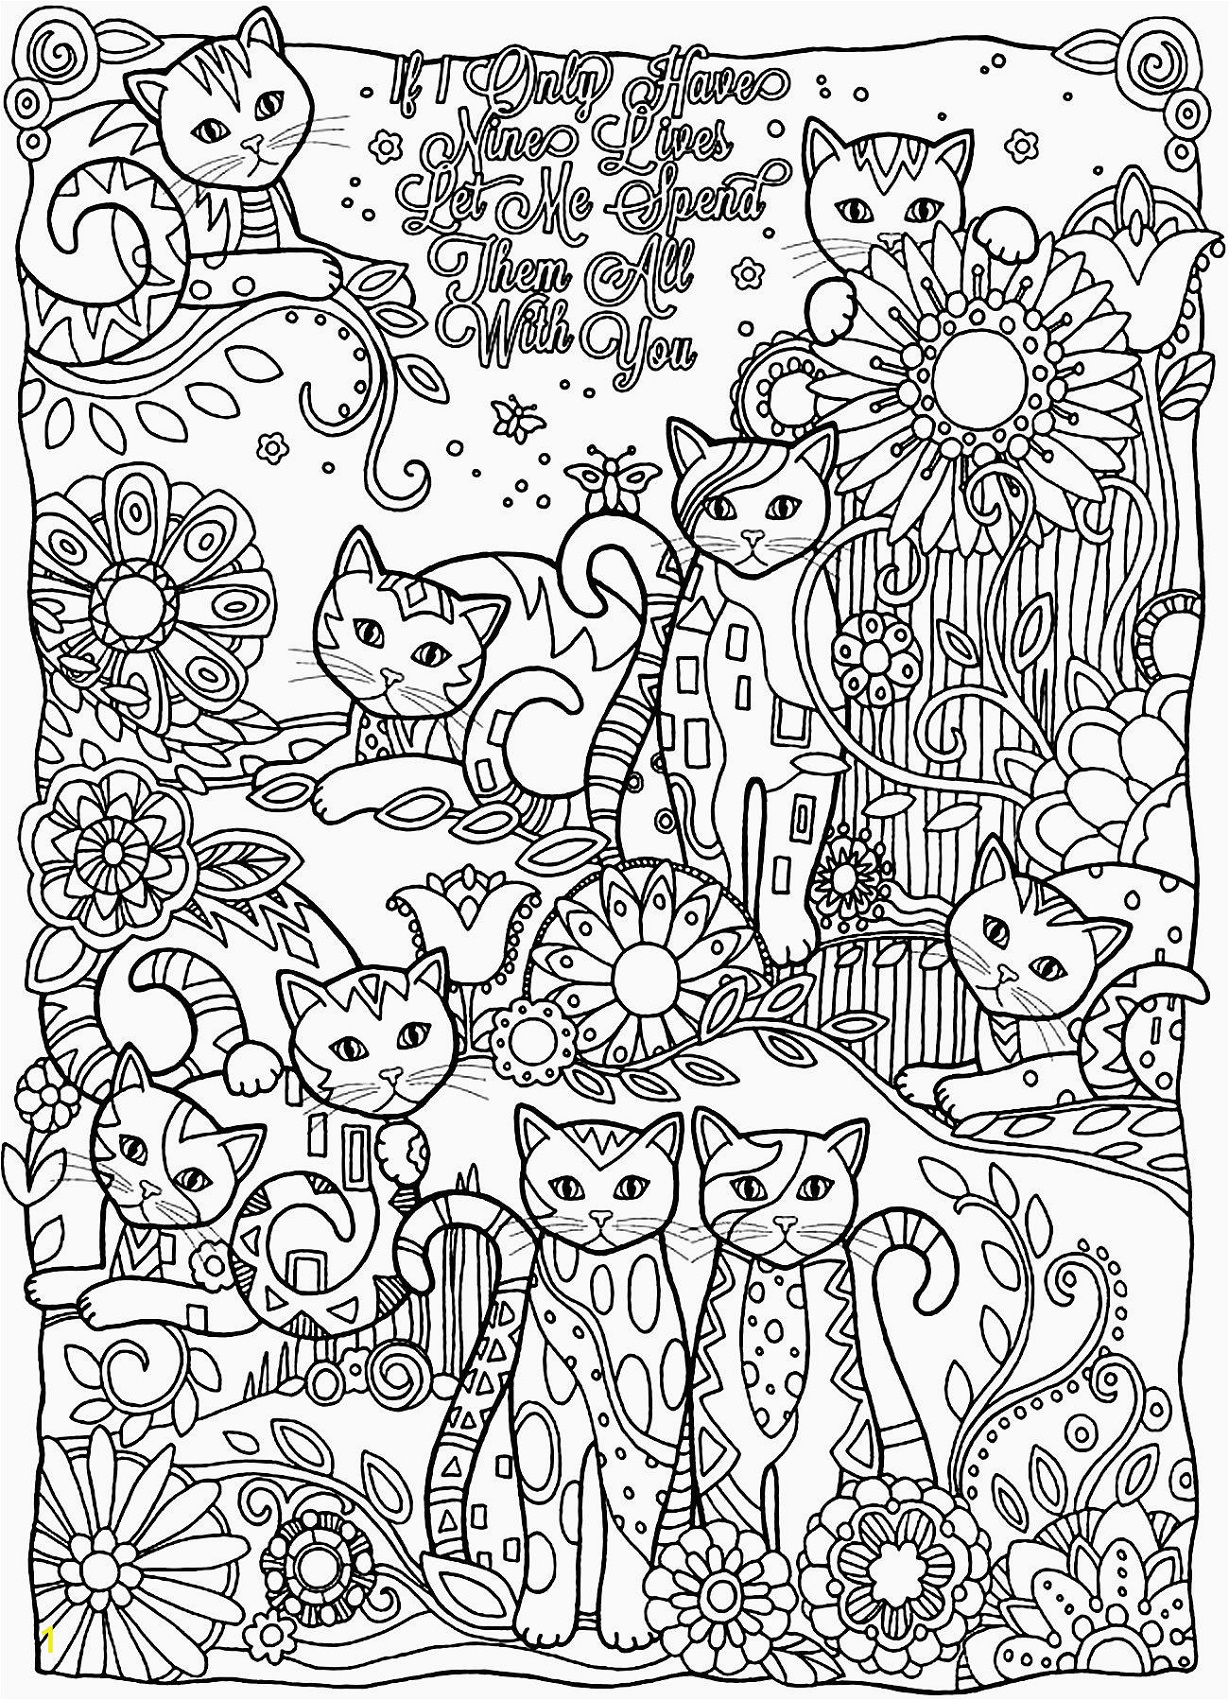 Cats Interactive Coloring Pages For Adults